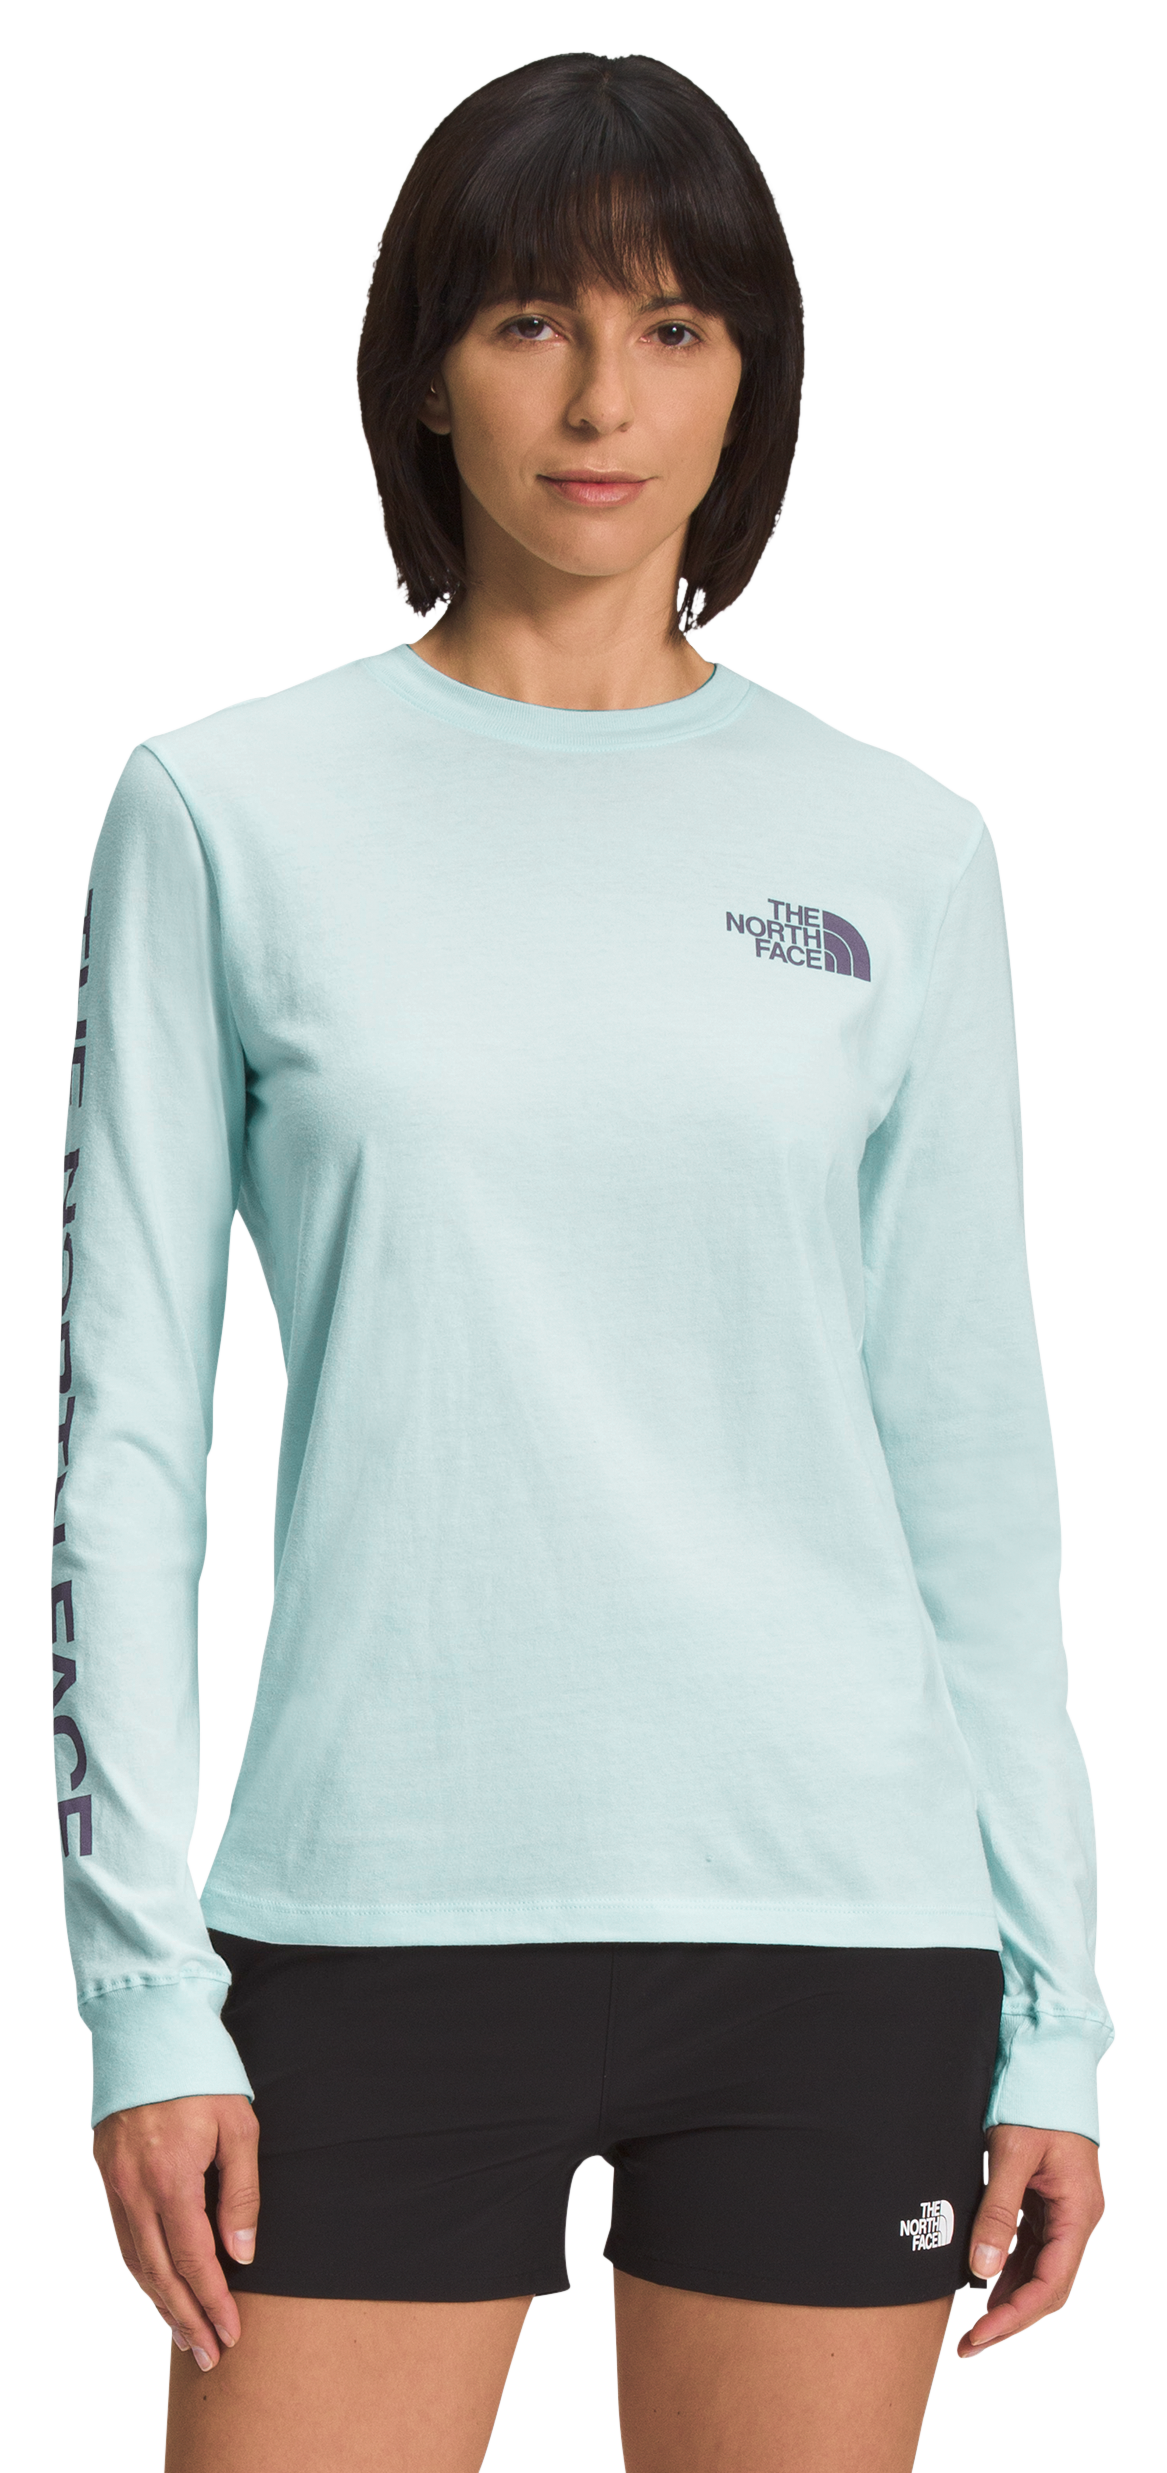 The North Face Hit Graphic Long-Sleeve T-Shirt for Ladies - Skylight Blue/Lunar Slate - L